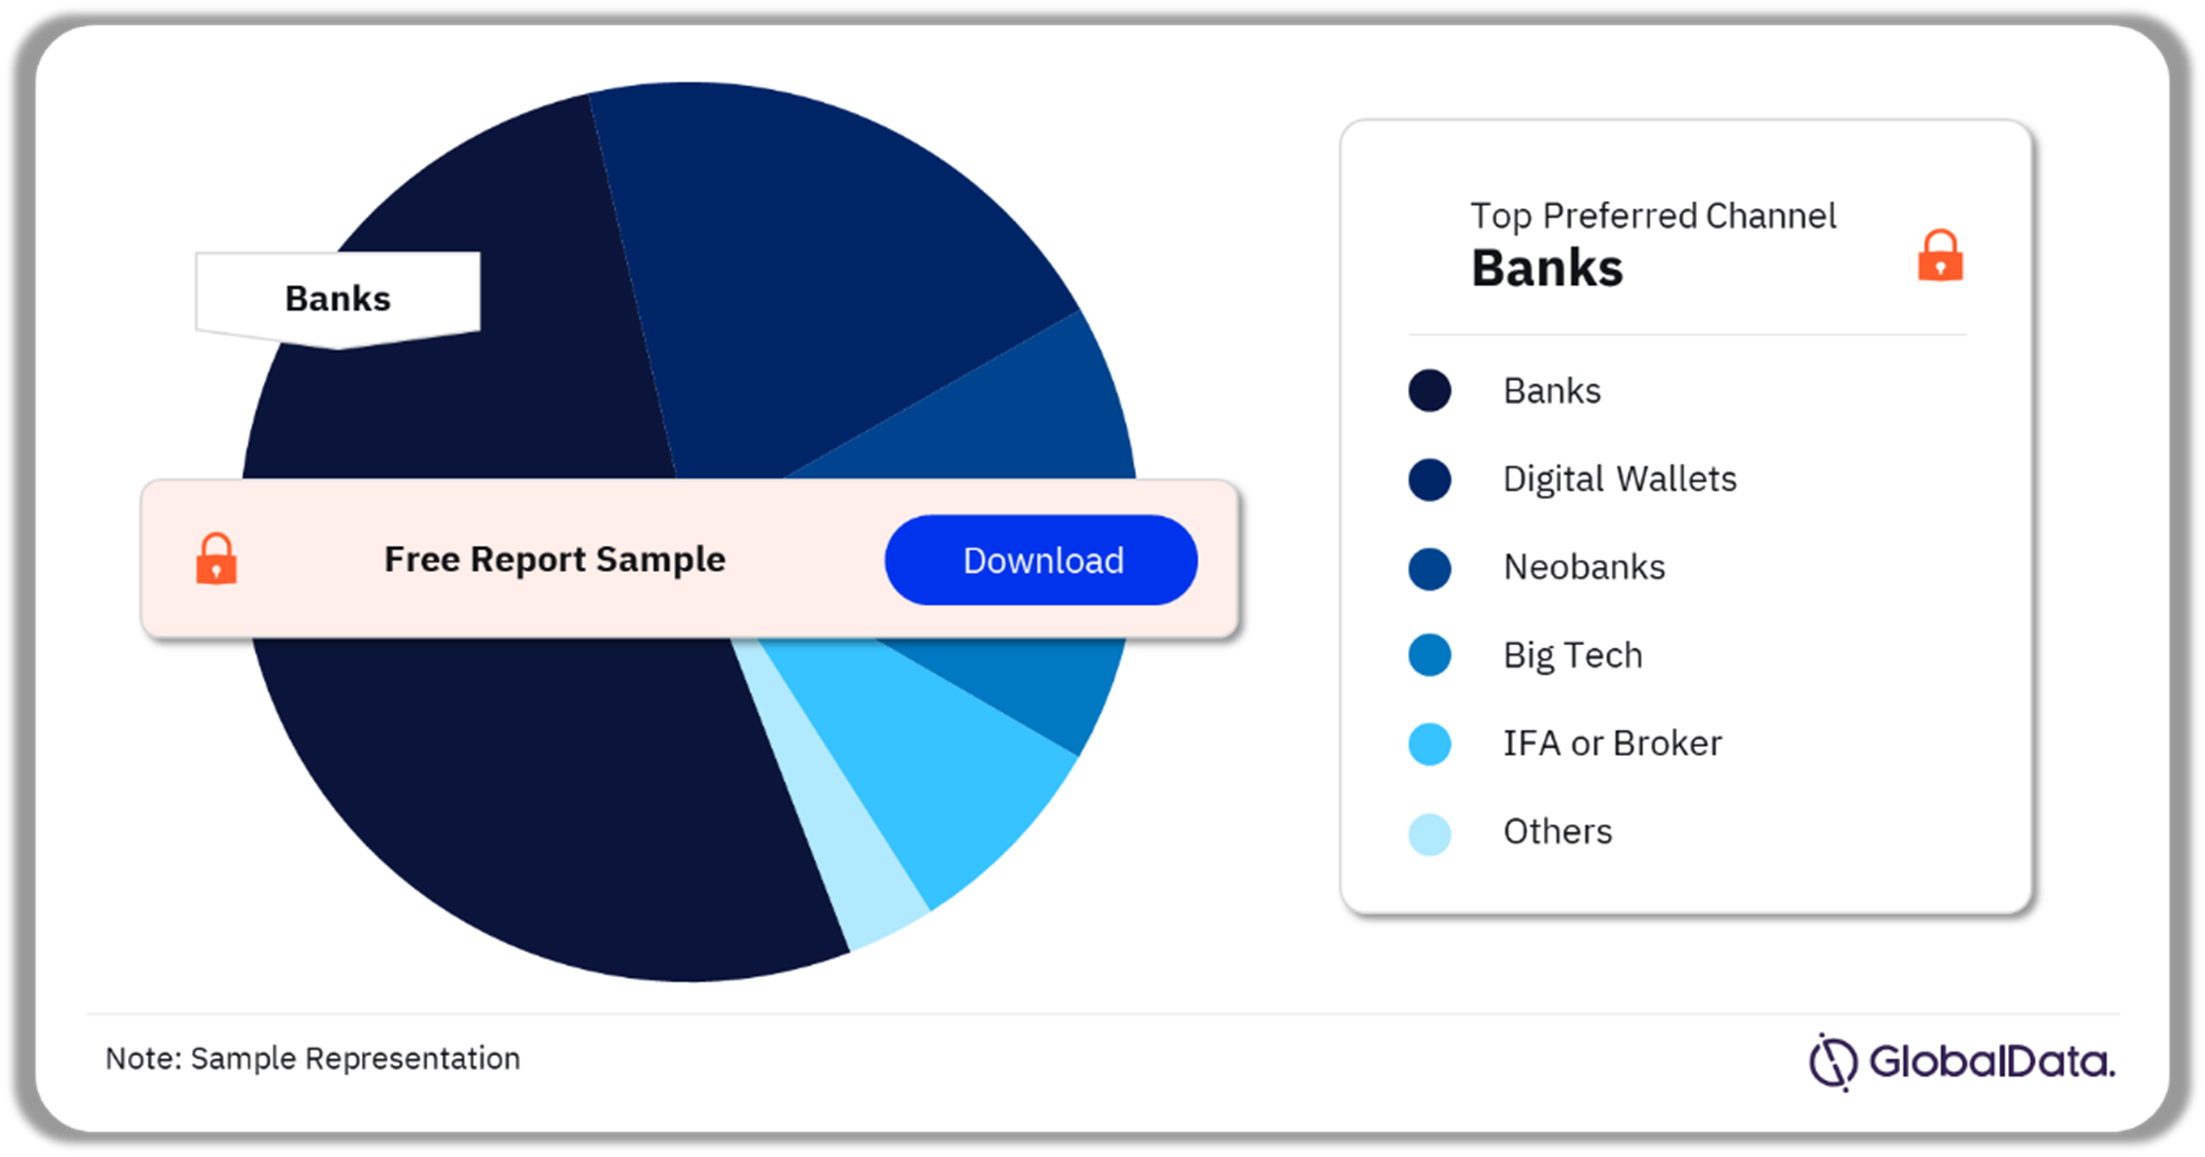 Mass Affluent Banking Market Analysis in Greater China by Preferred Channel, 2023 (%)